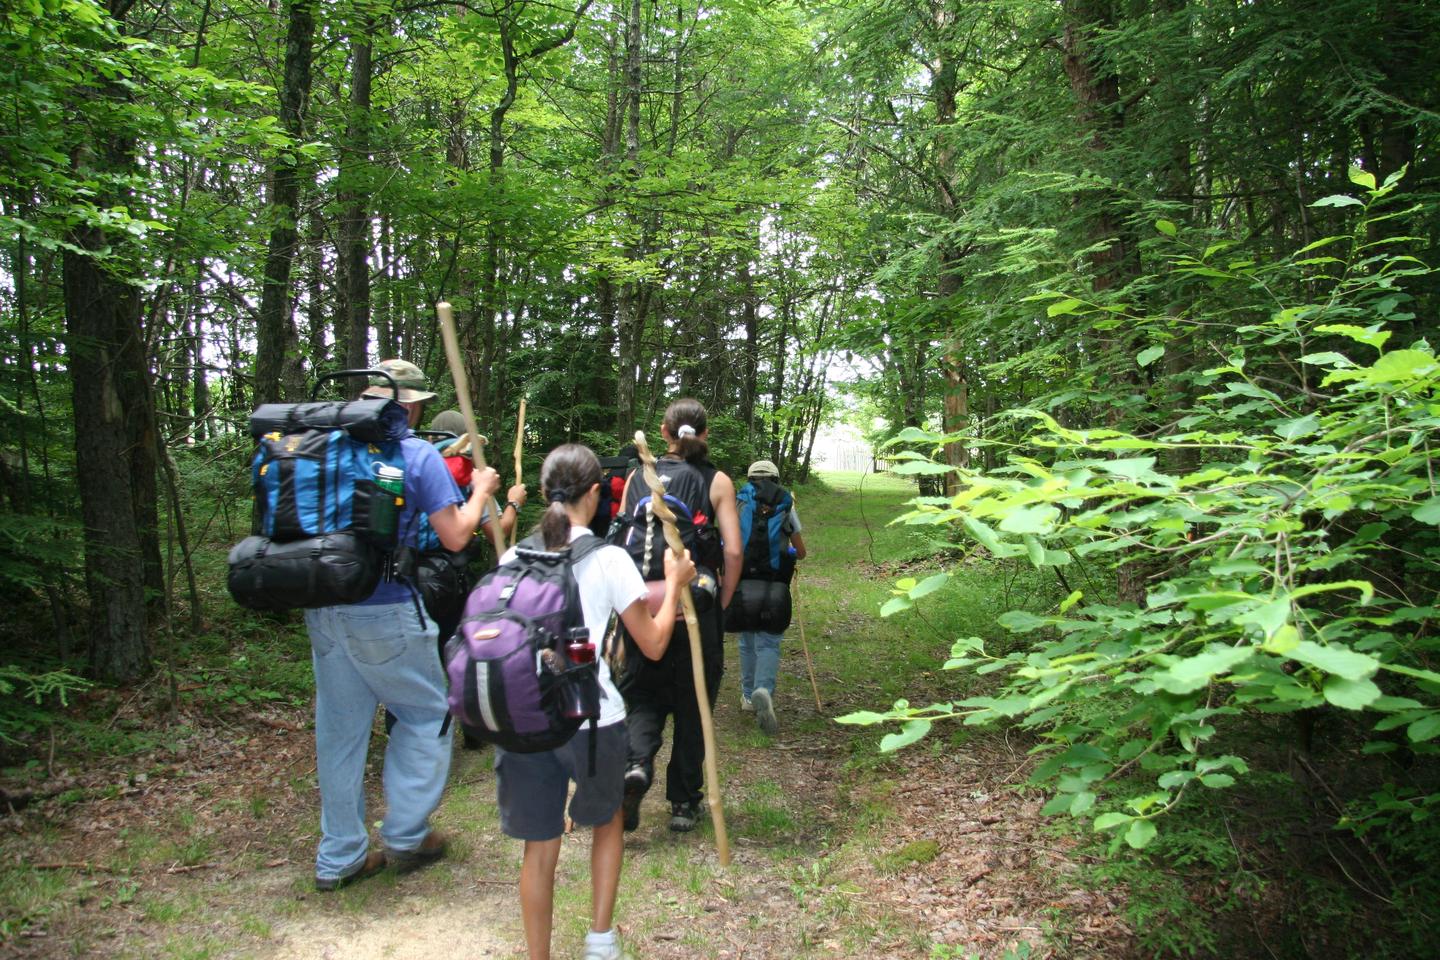 A group of 6 hikers with backpacks and walking sticks walk on a trail through the forest.The park includes over 24,000 acres, with over 14,000 acres of recommended wilderness and about 85 miles of hiking trails.